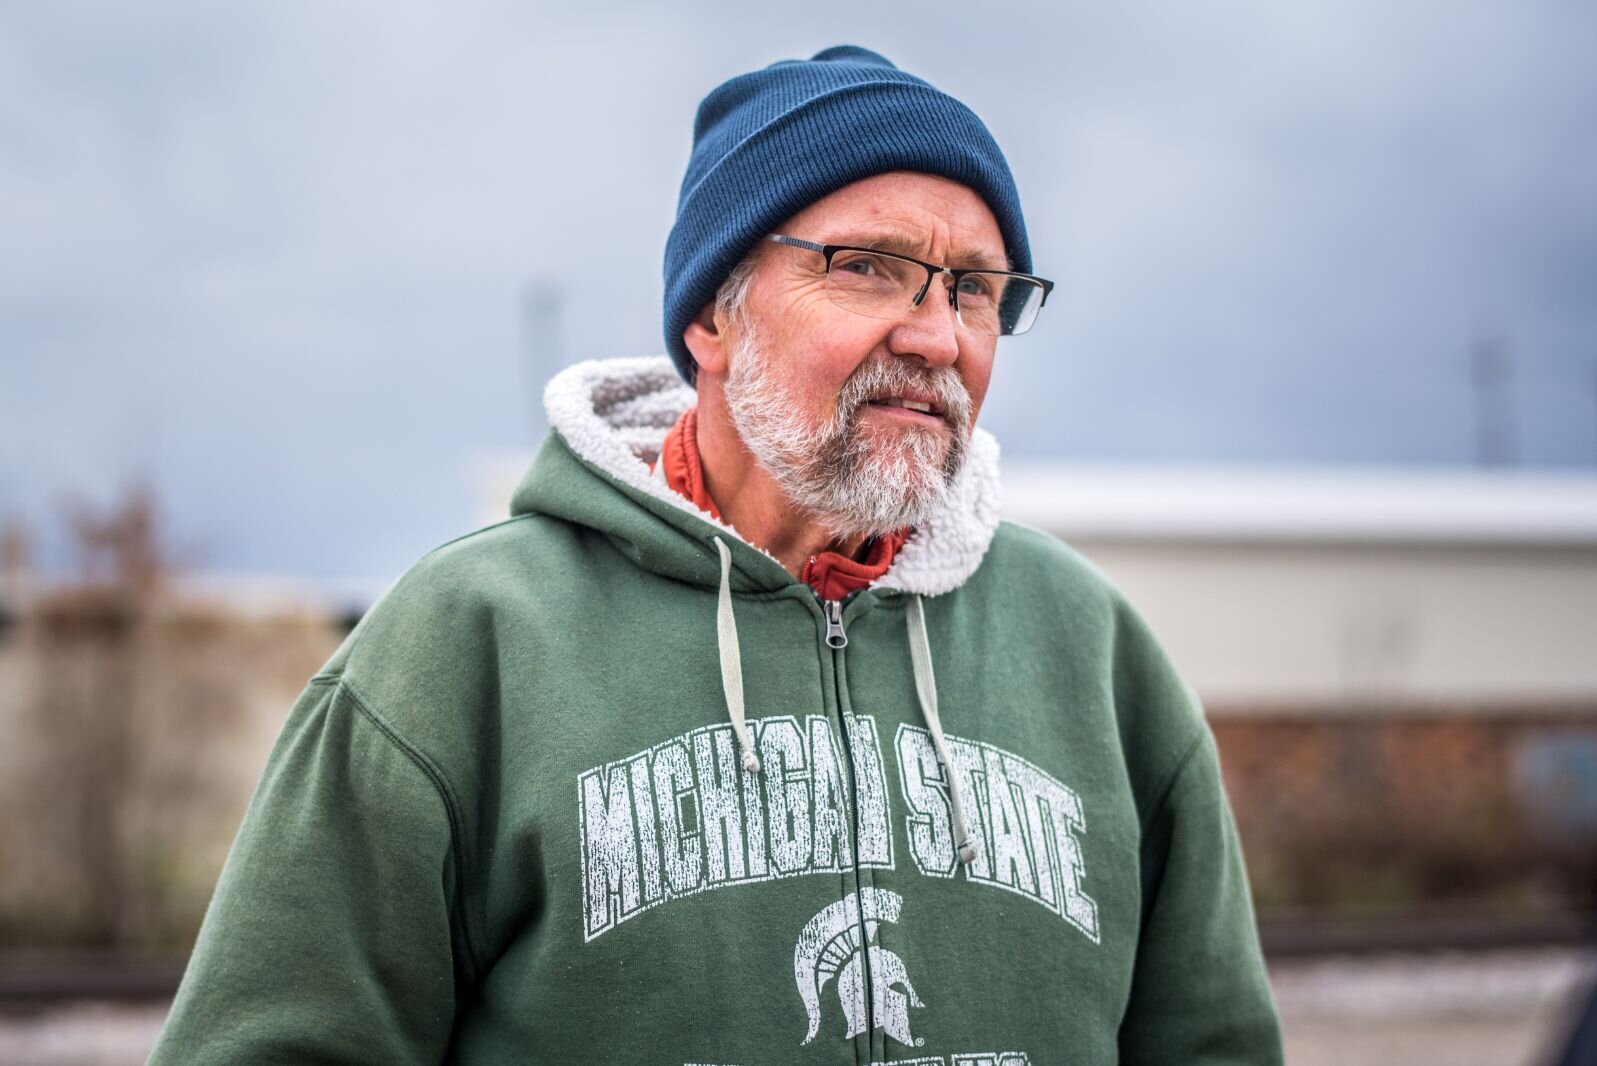 Having retired from his career at Pfizer, Jan van Schaik has become an advocate for unsheltered people in Kalamazoo.